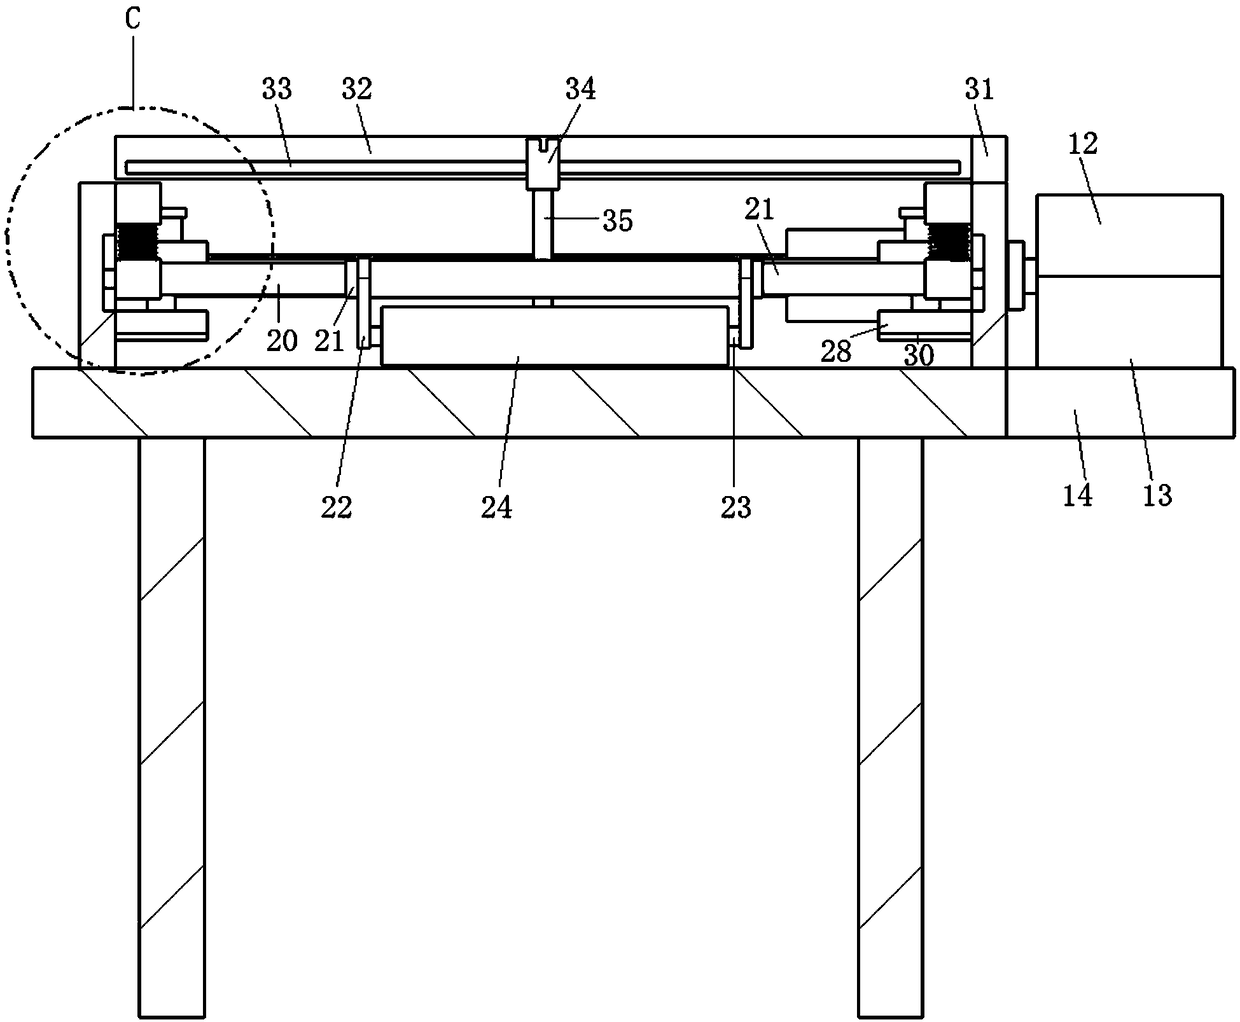 Cloth cutting device for garment processing